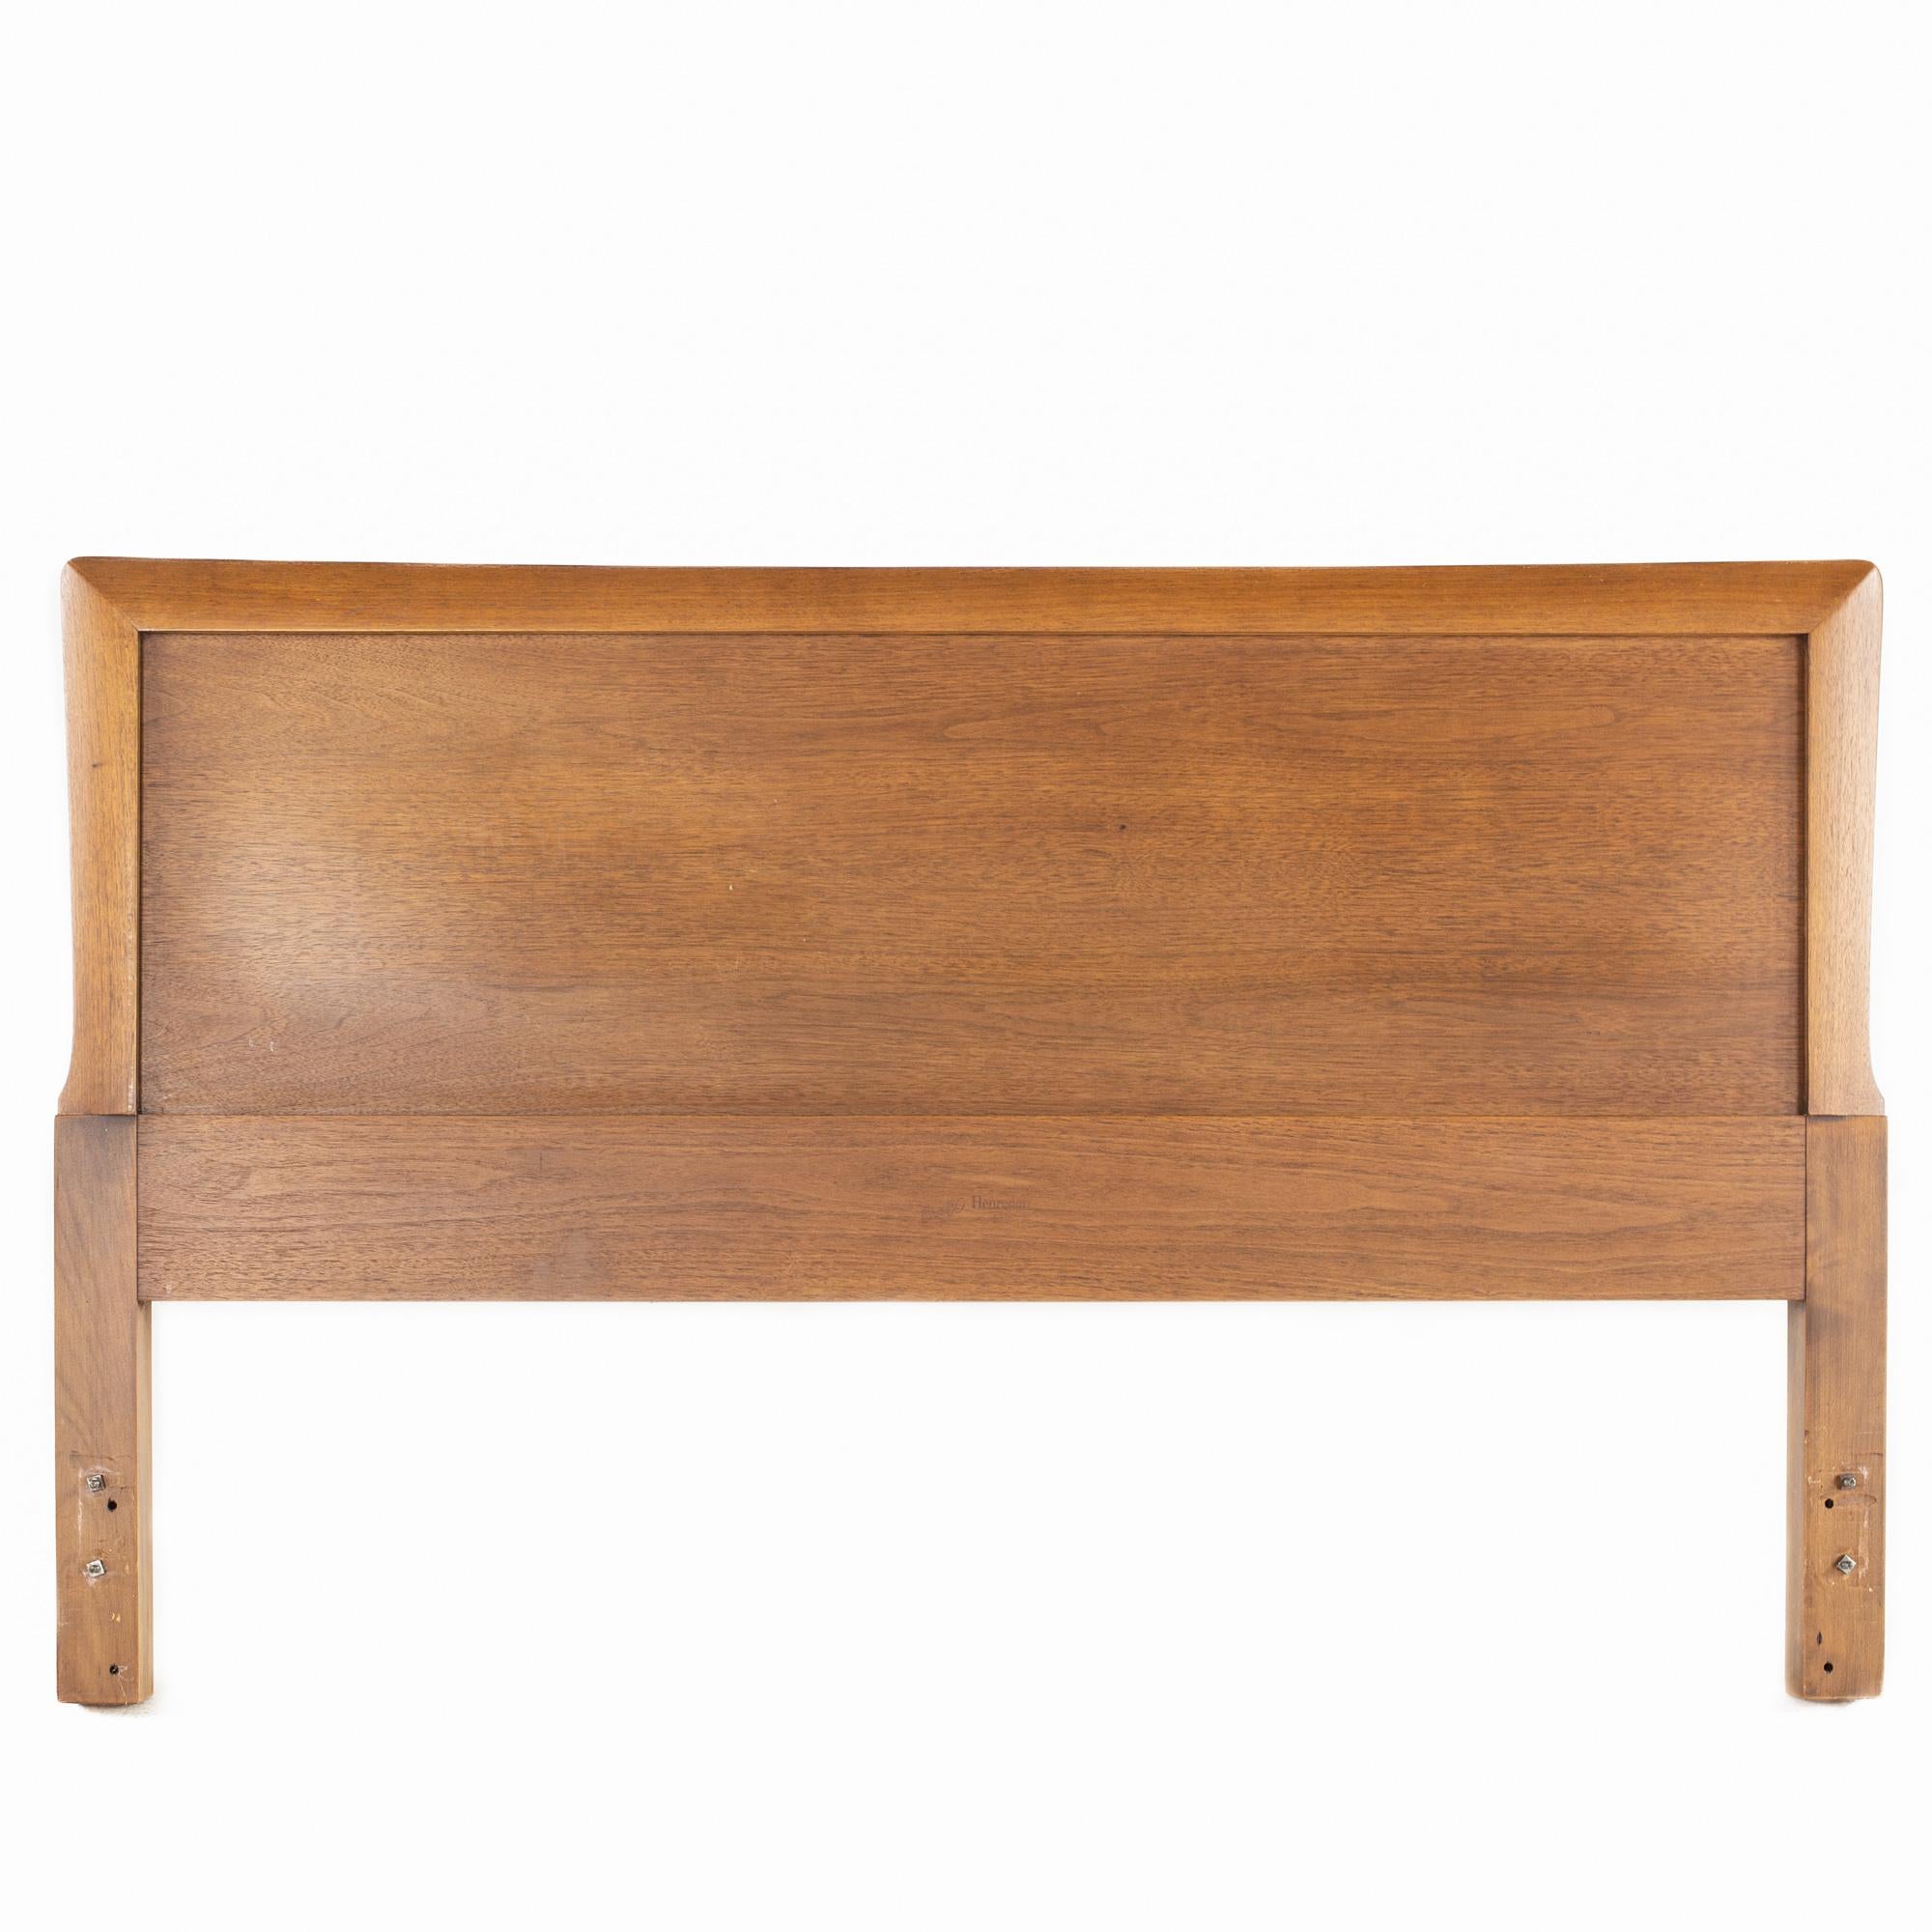 Henredon Circa 60' mid century walnut full headboard.

The headboard measures: 54.5 wide x 2.5 deep x 34 inches high.

All pieces of furniture can be had in what we call restored vintage condition. That means the piece is restored upon purchase